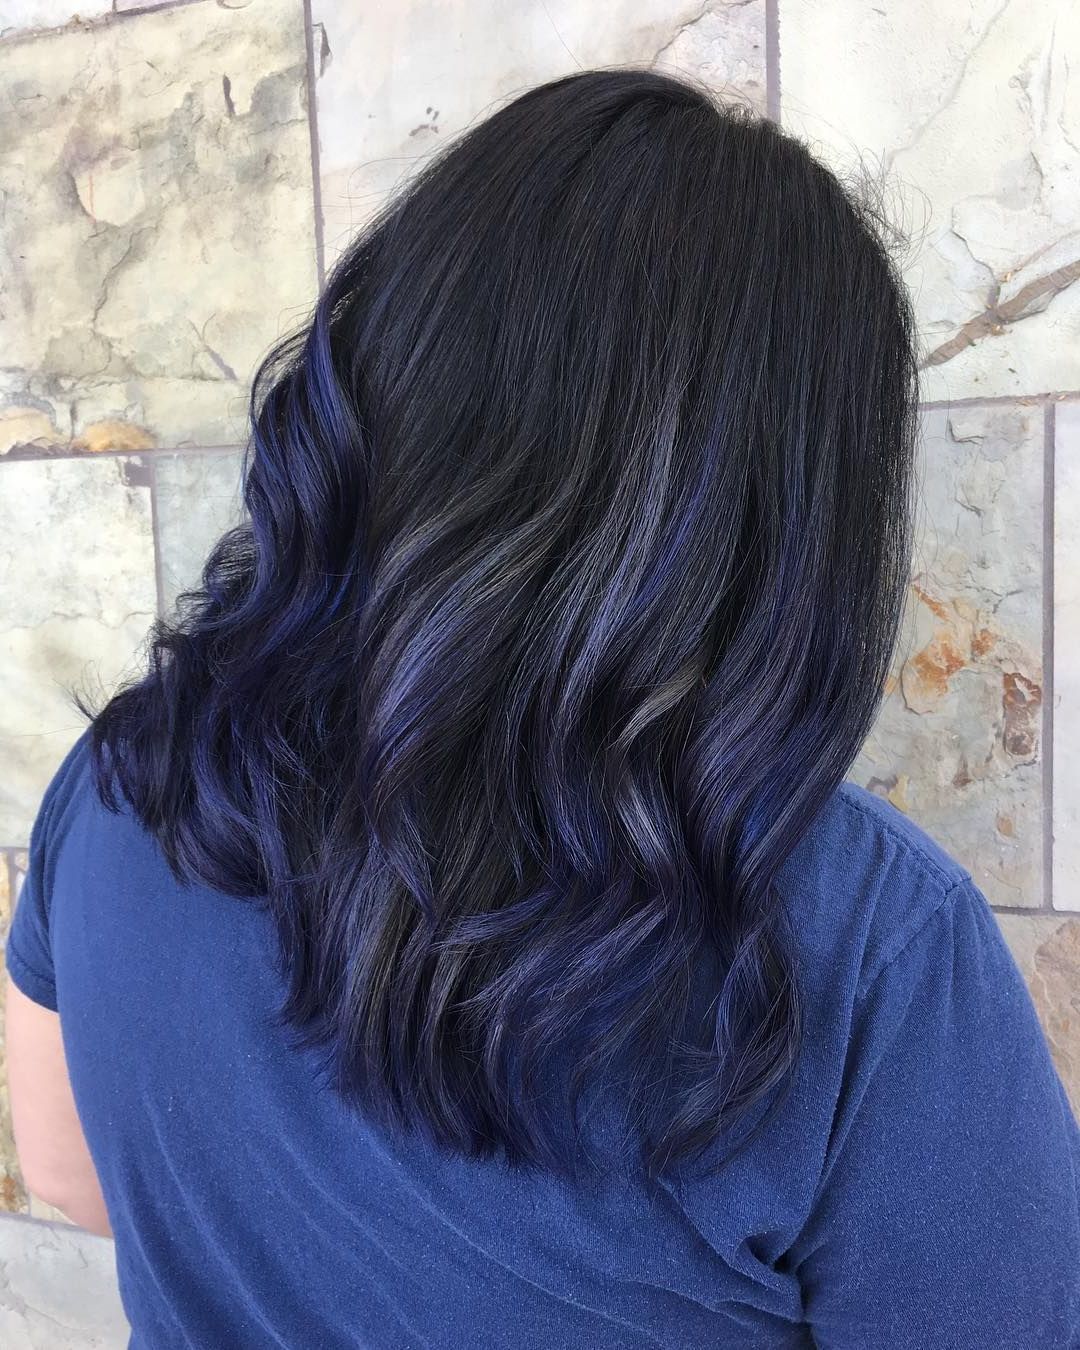 Blueberry Hair Doneamanda Instagram: @mandas So Fetch Works At  @the.rose.hair (View 5 of 20)